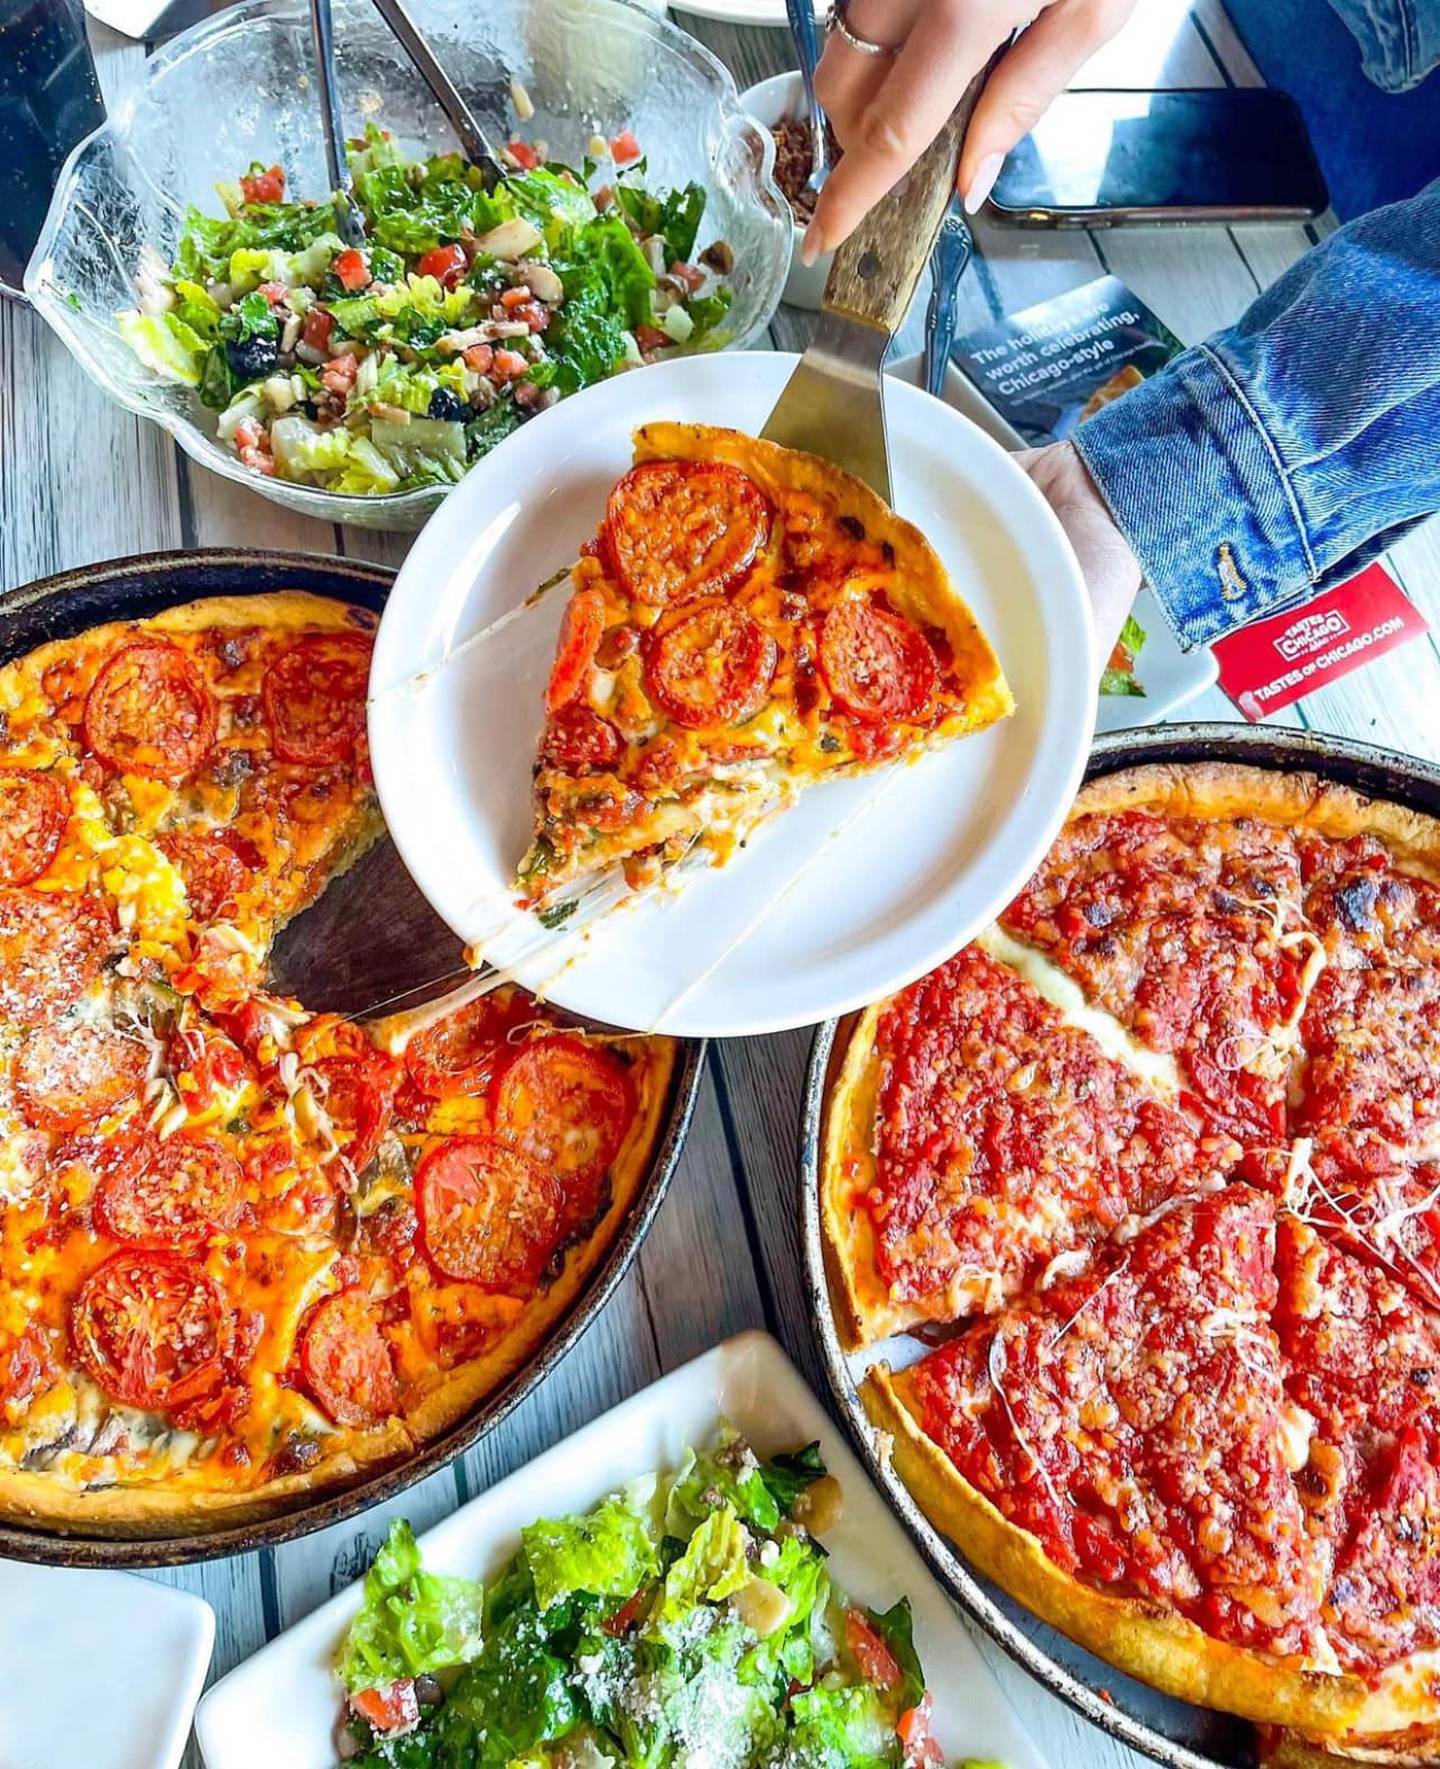 Lou Malnati's Pizzeria - Carry Out was voted by our Best of the Fox Readers for 2021 best deep dish pizza in Kane County.  (Photo from Lou Malnati's Facebook page).